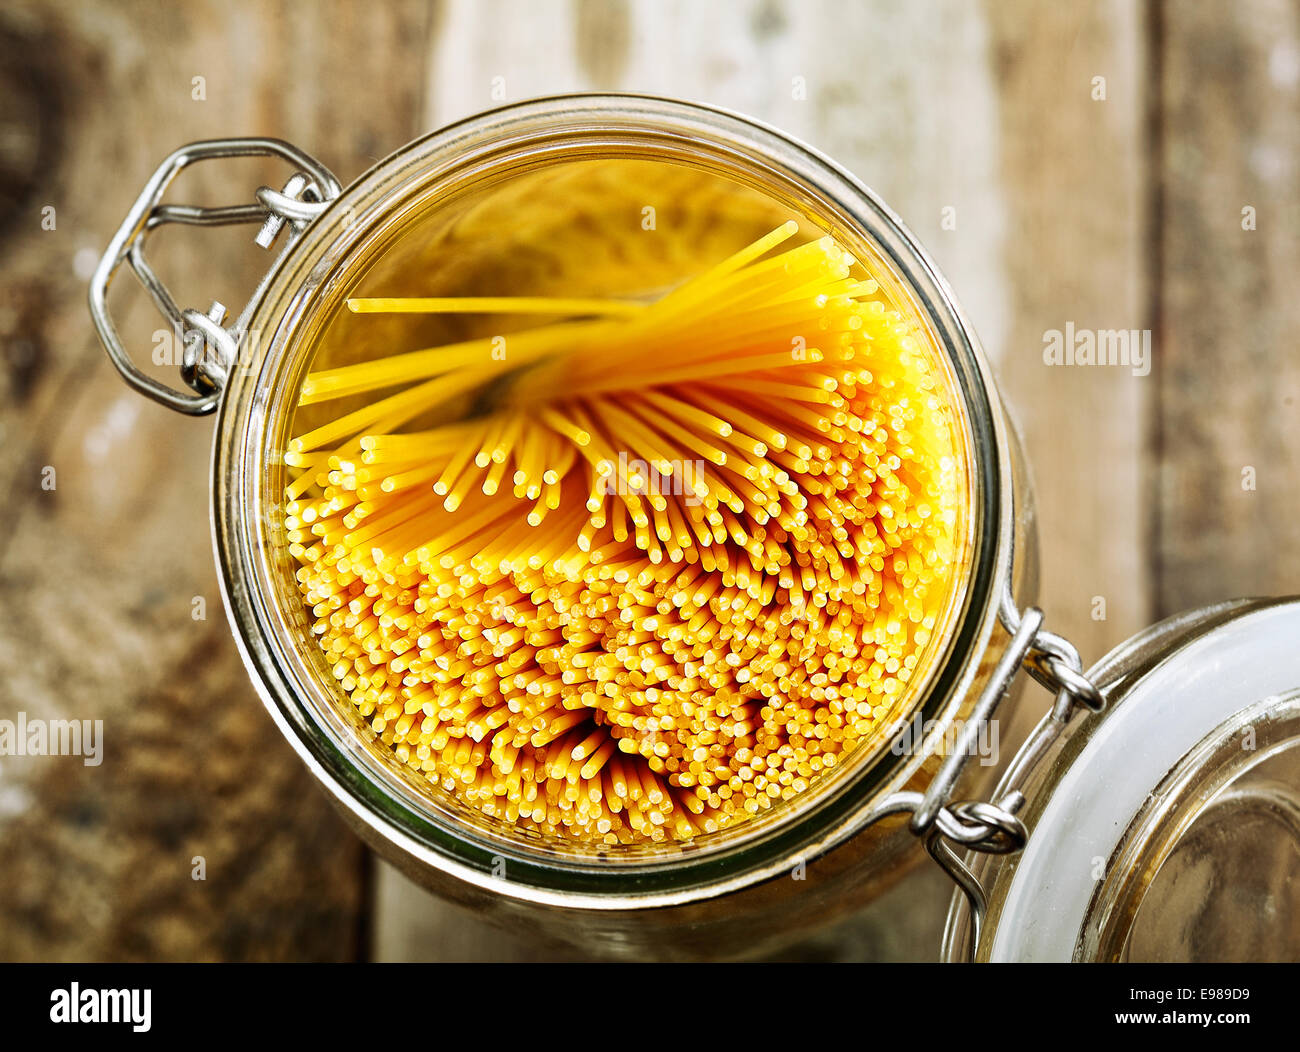 Overhead view of an open kitchen container full of spaghetti used for preparing Italian pasta dishes standing on a wooden background Stock Photo